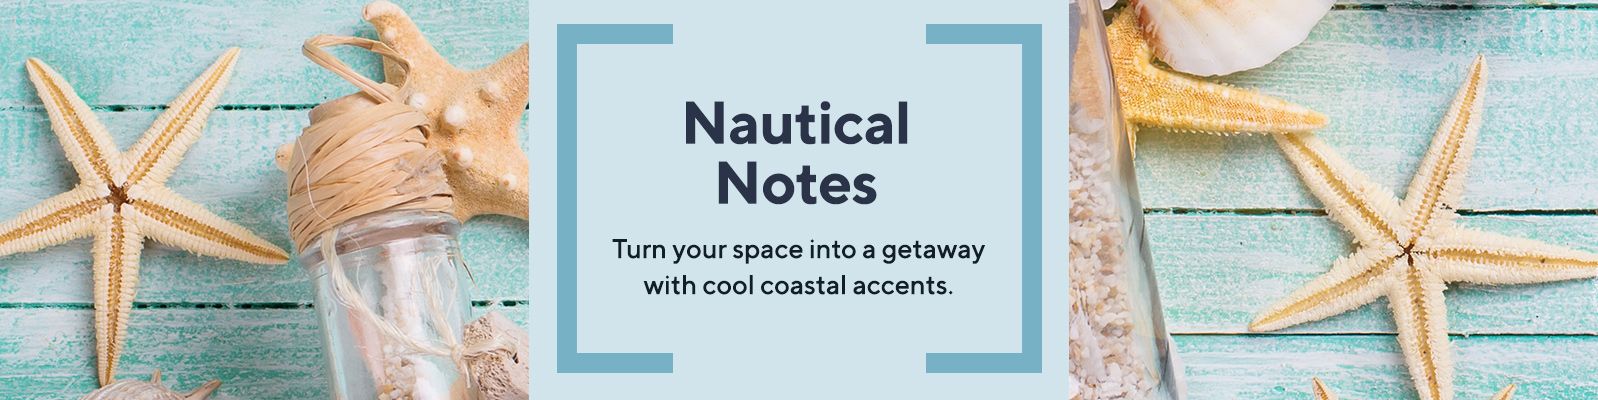 Nautical Notes.  Turn your space into a getaway with cool coastal accents.